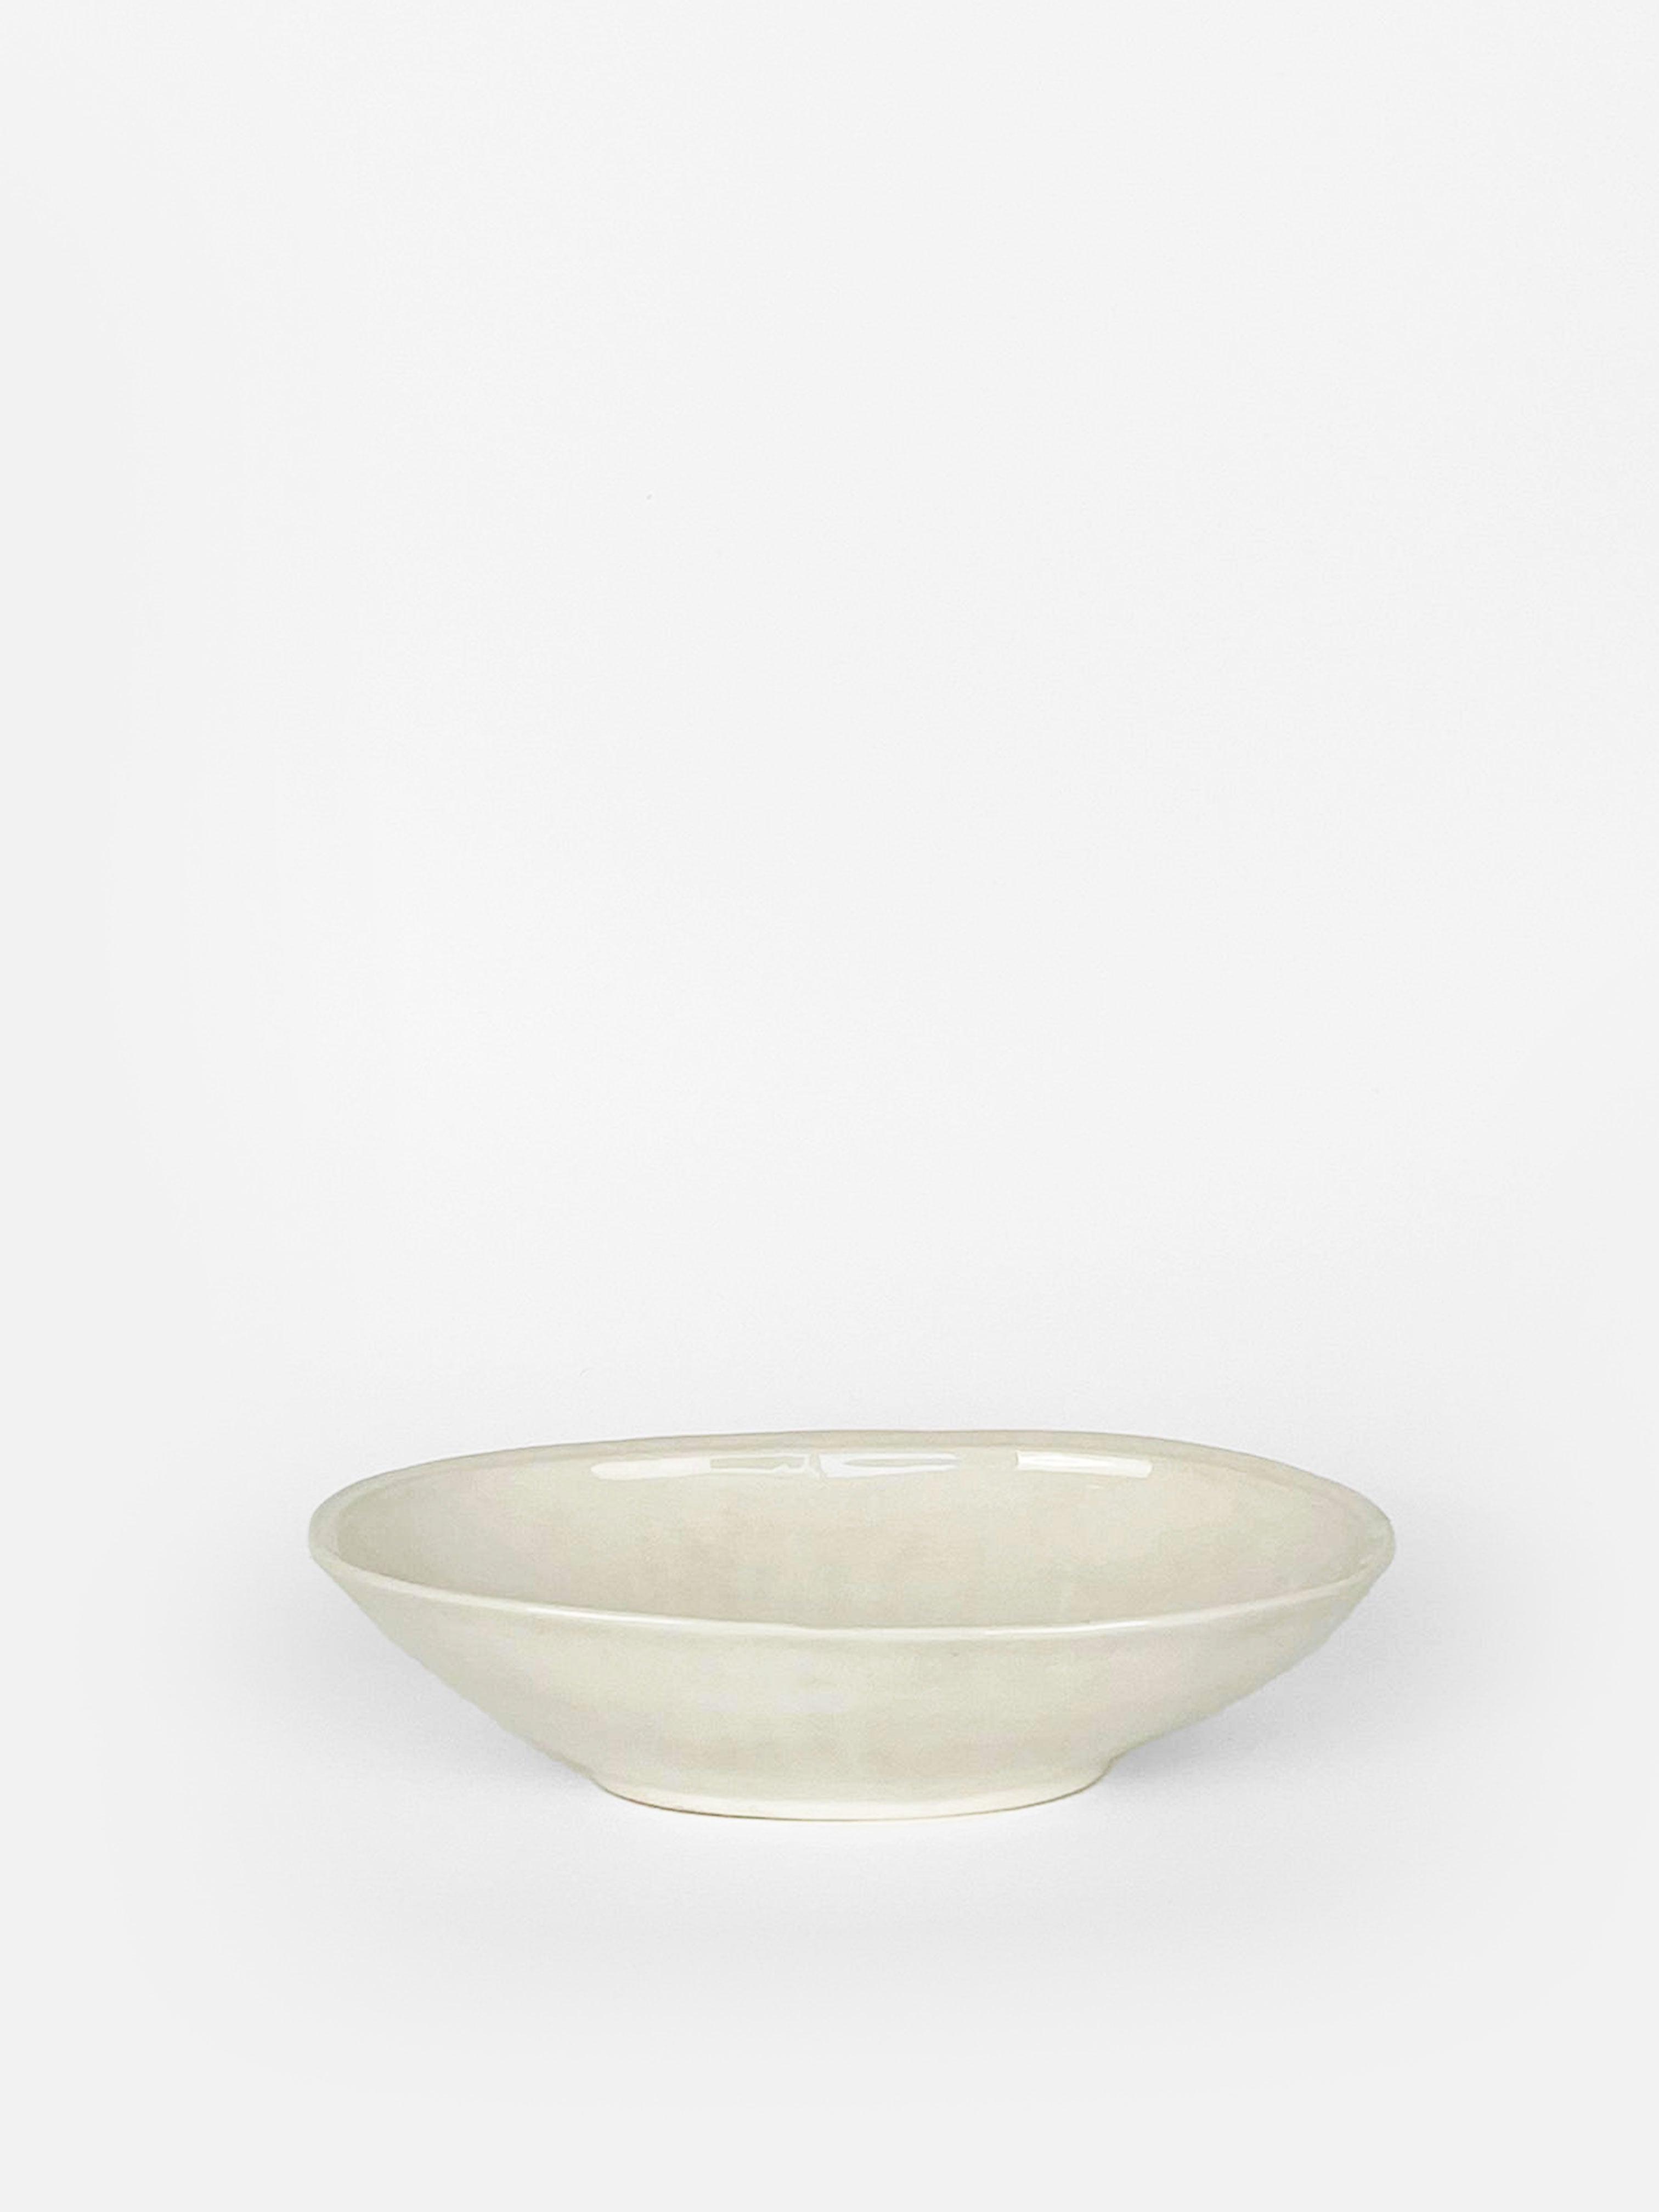 The Creamery Oval Serving Dish